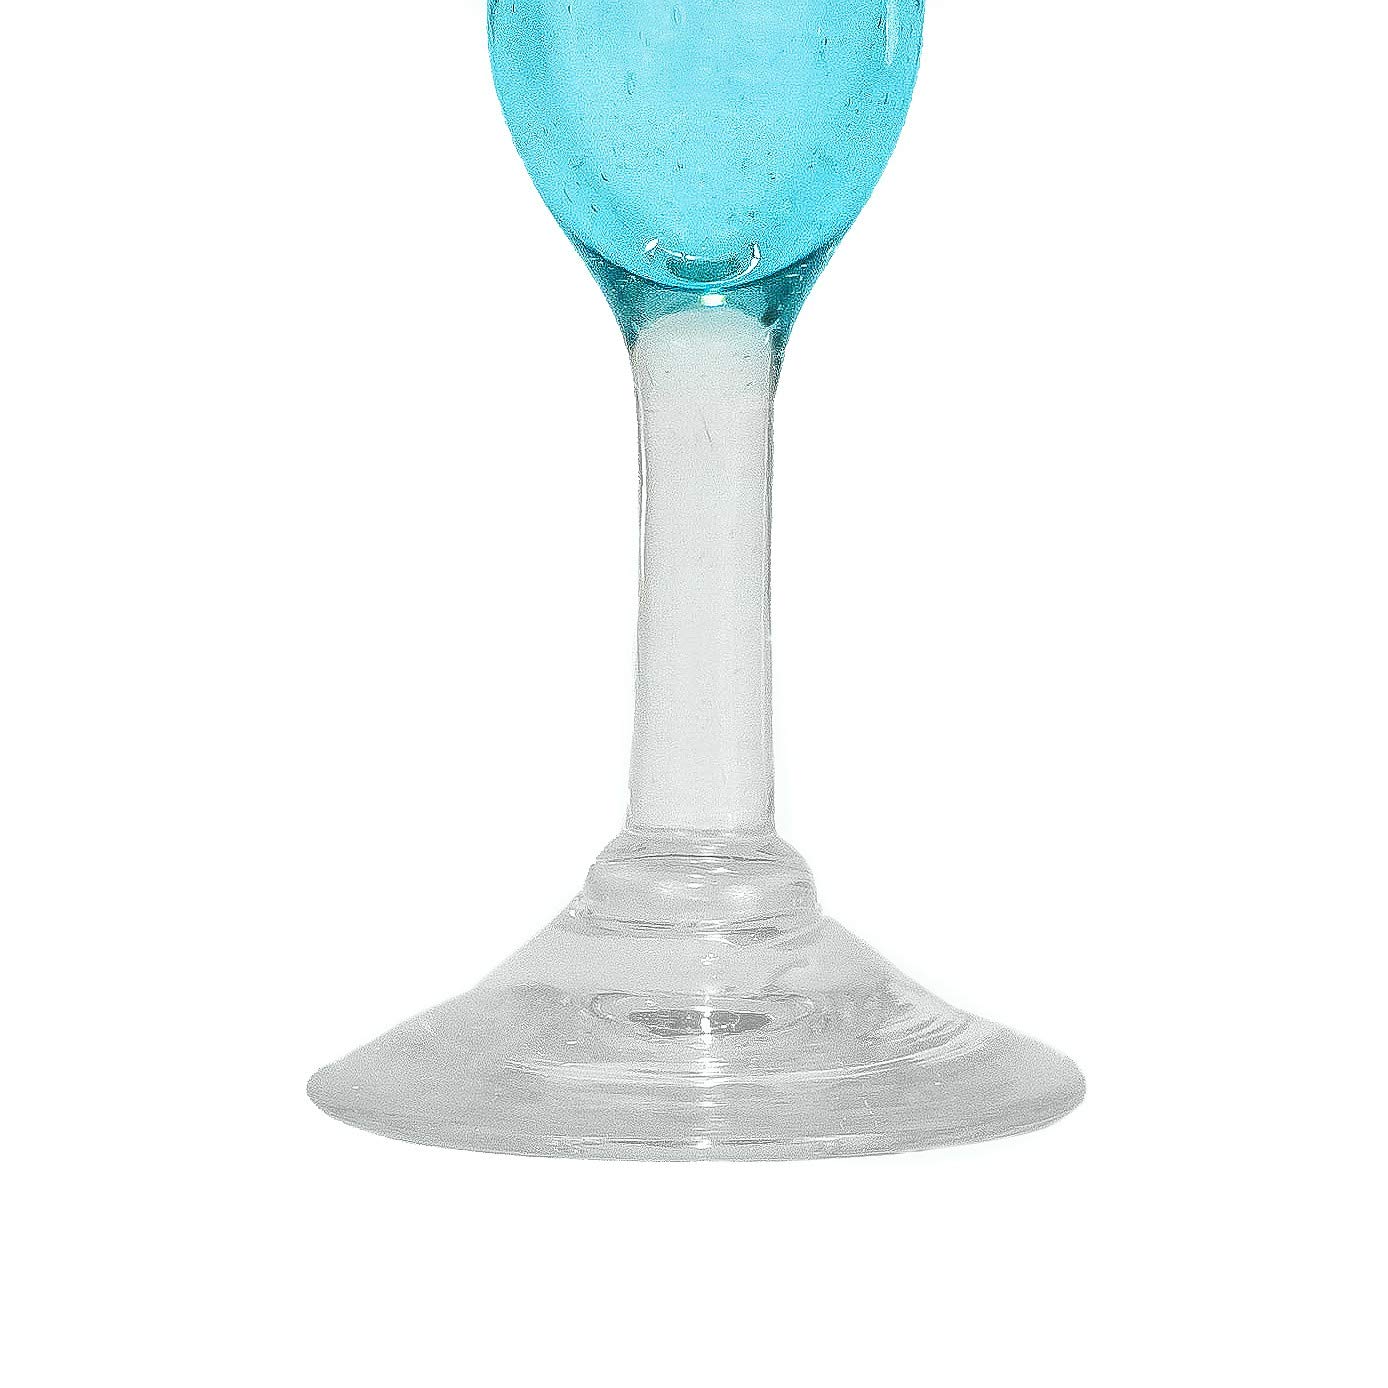 Amici Home Acapulco Collection, Authentic Mexican Handmade Margarita Glasses, Bar Glassware for Cocktails & Other Beverages, Blue Glass, Yellow Rimmed, made in Mexico 15-Ounces, Set of 4